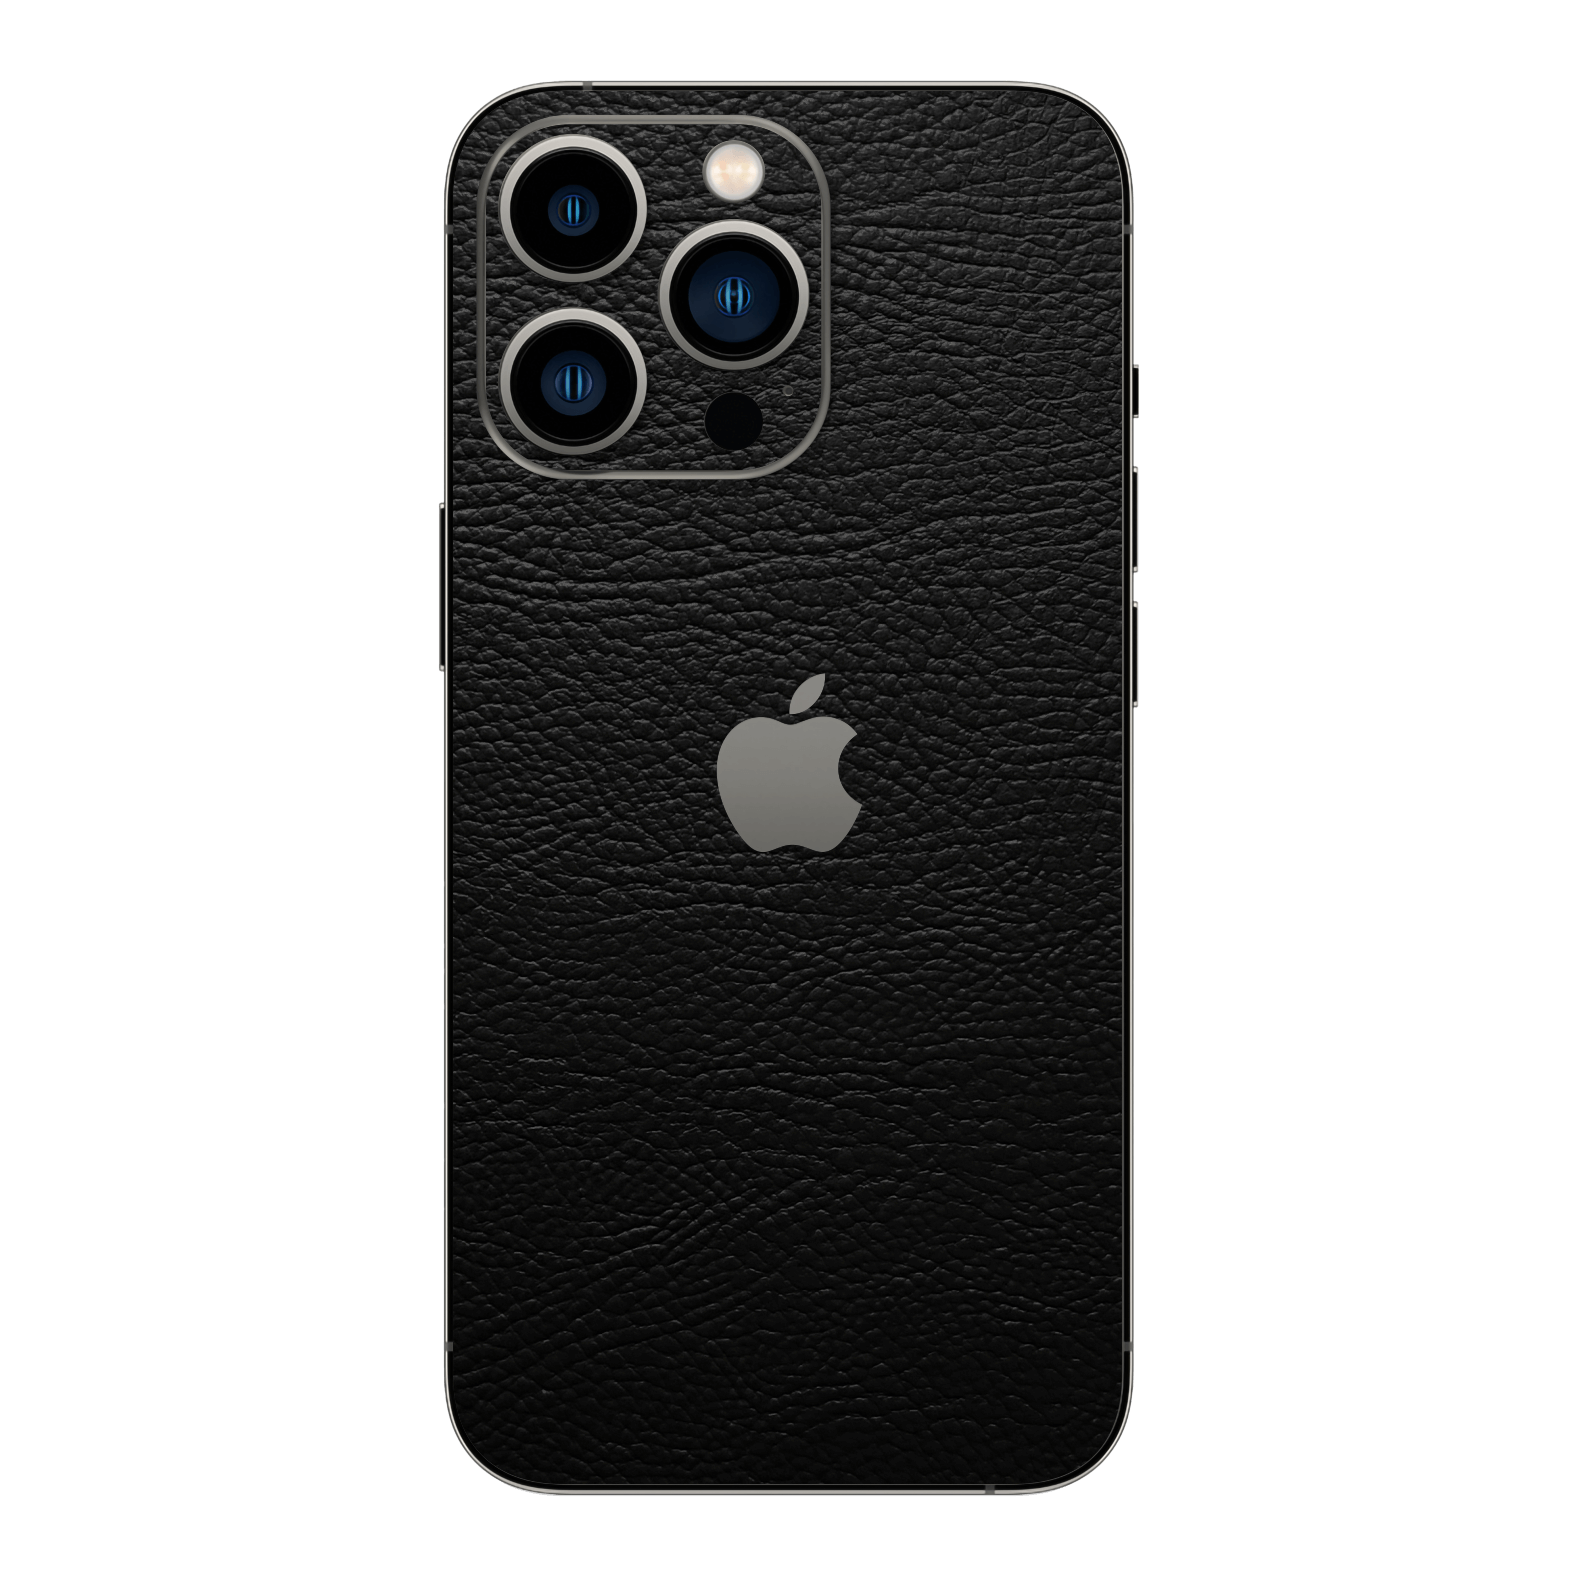 iPhone 15 Pro MAX LUXURIA RIDERS Black LEATHER Textured Skin - Premium Protective Skin Wrap Sticker Decal Cover by QSKINZ | Qskinz.com